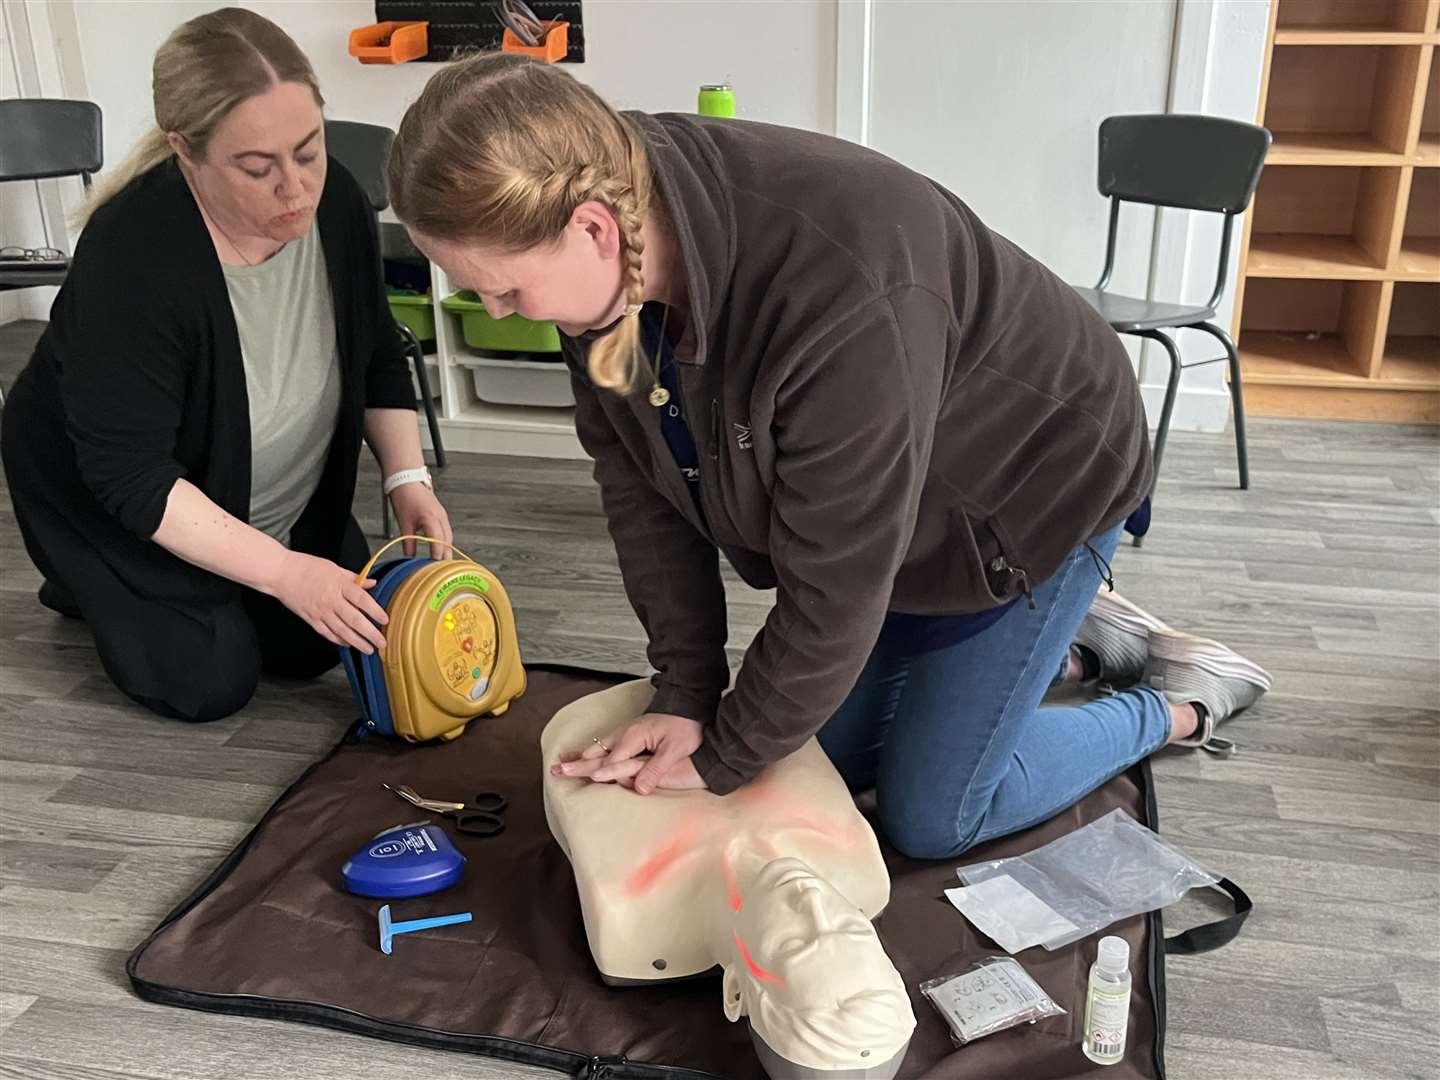 KCCKC committee member Tracy McBay (left) and parent Louise McNeill trying to resuscitate the individual using the defibrillator.